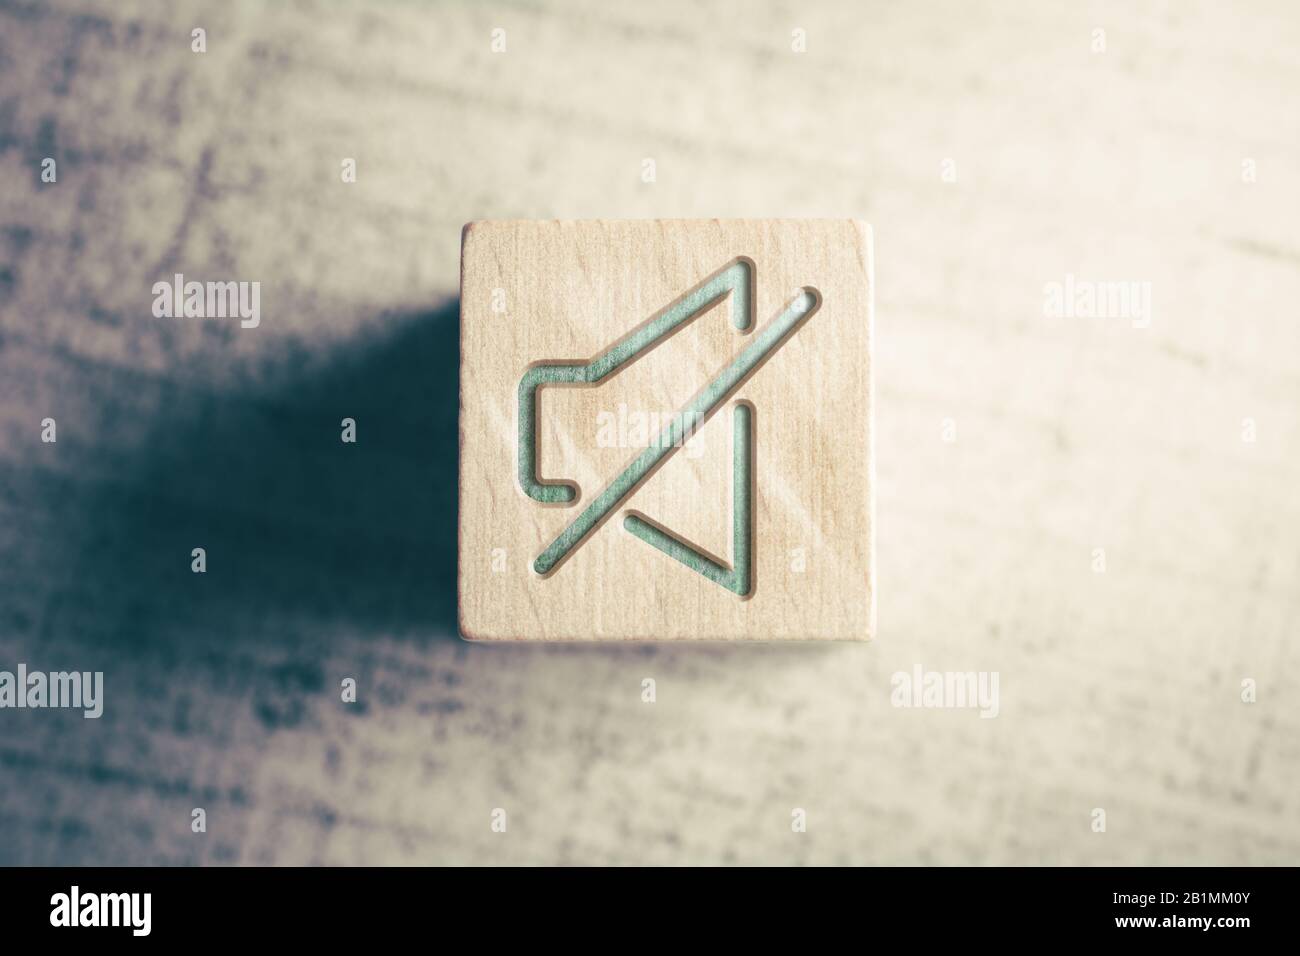 Volume Mute Icon On A Wooden Block On A Table Stock Photo